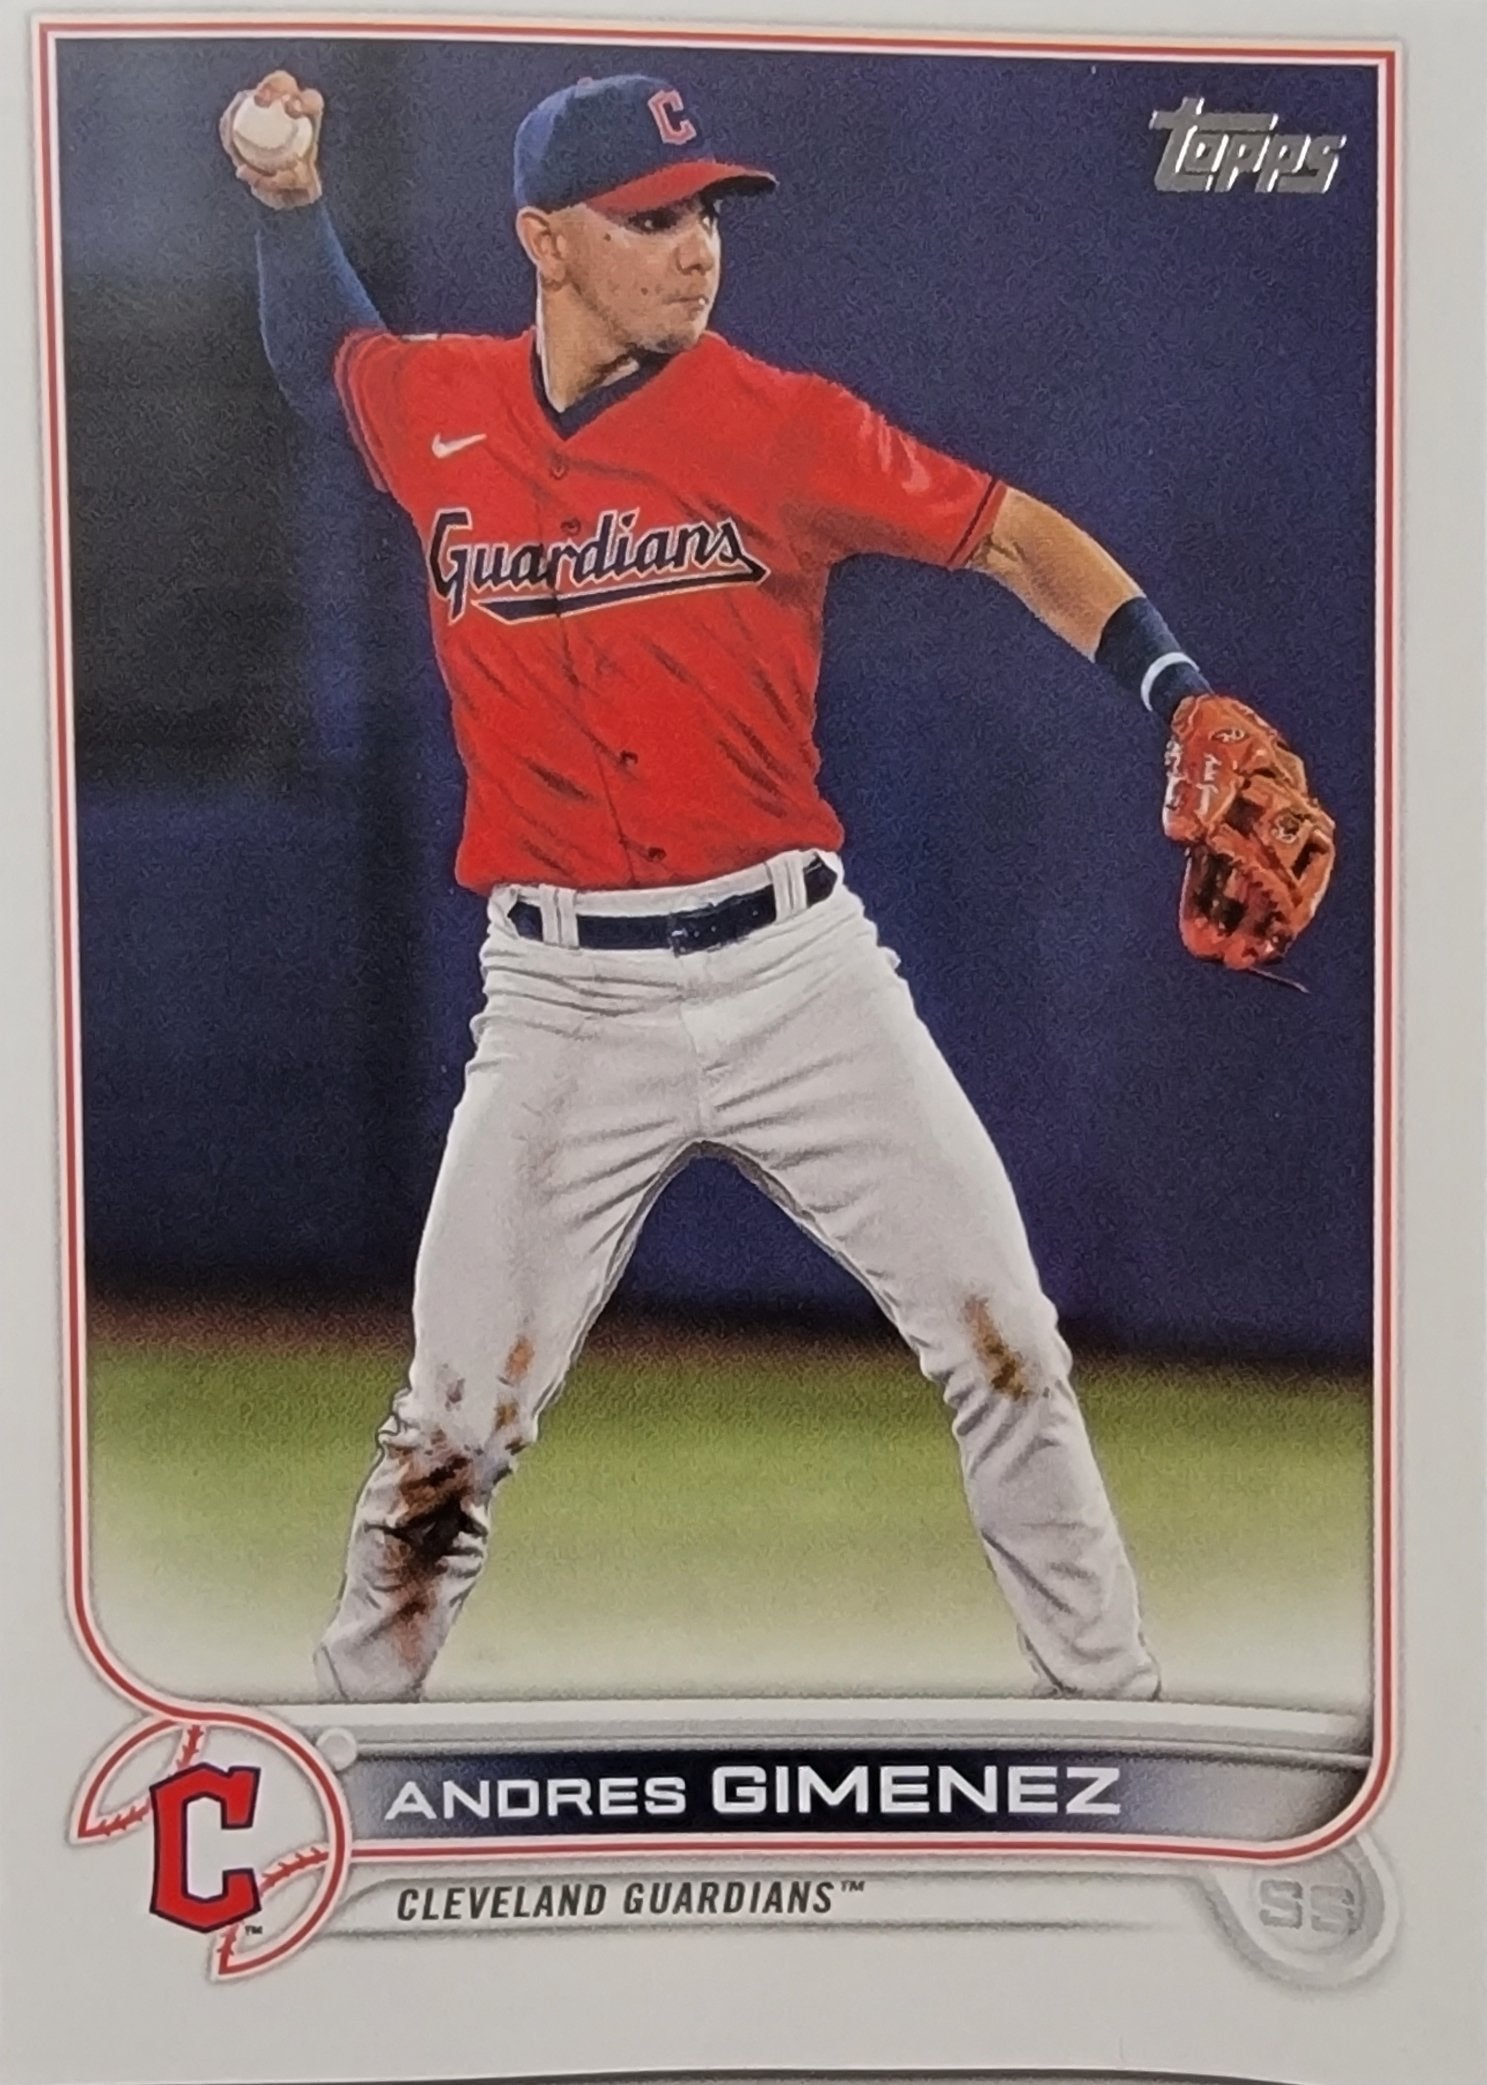 2022 Topps Series 2 Andres Giminez Baseball Card AVM1 simple Xclusive Collectibles   